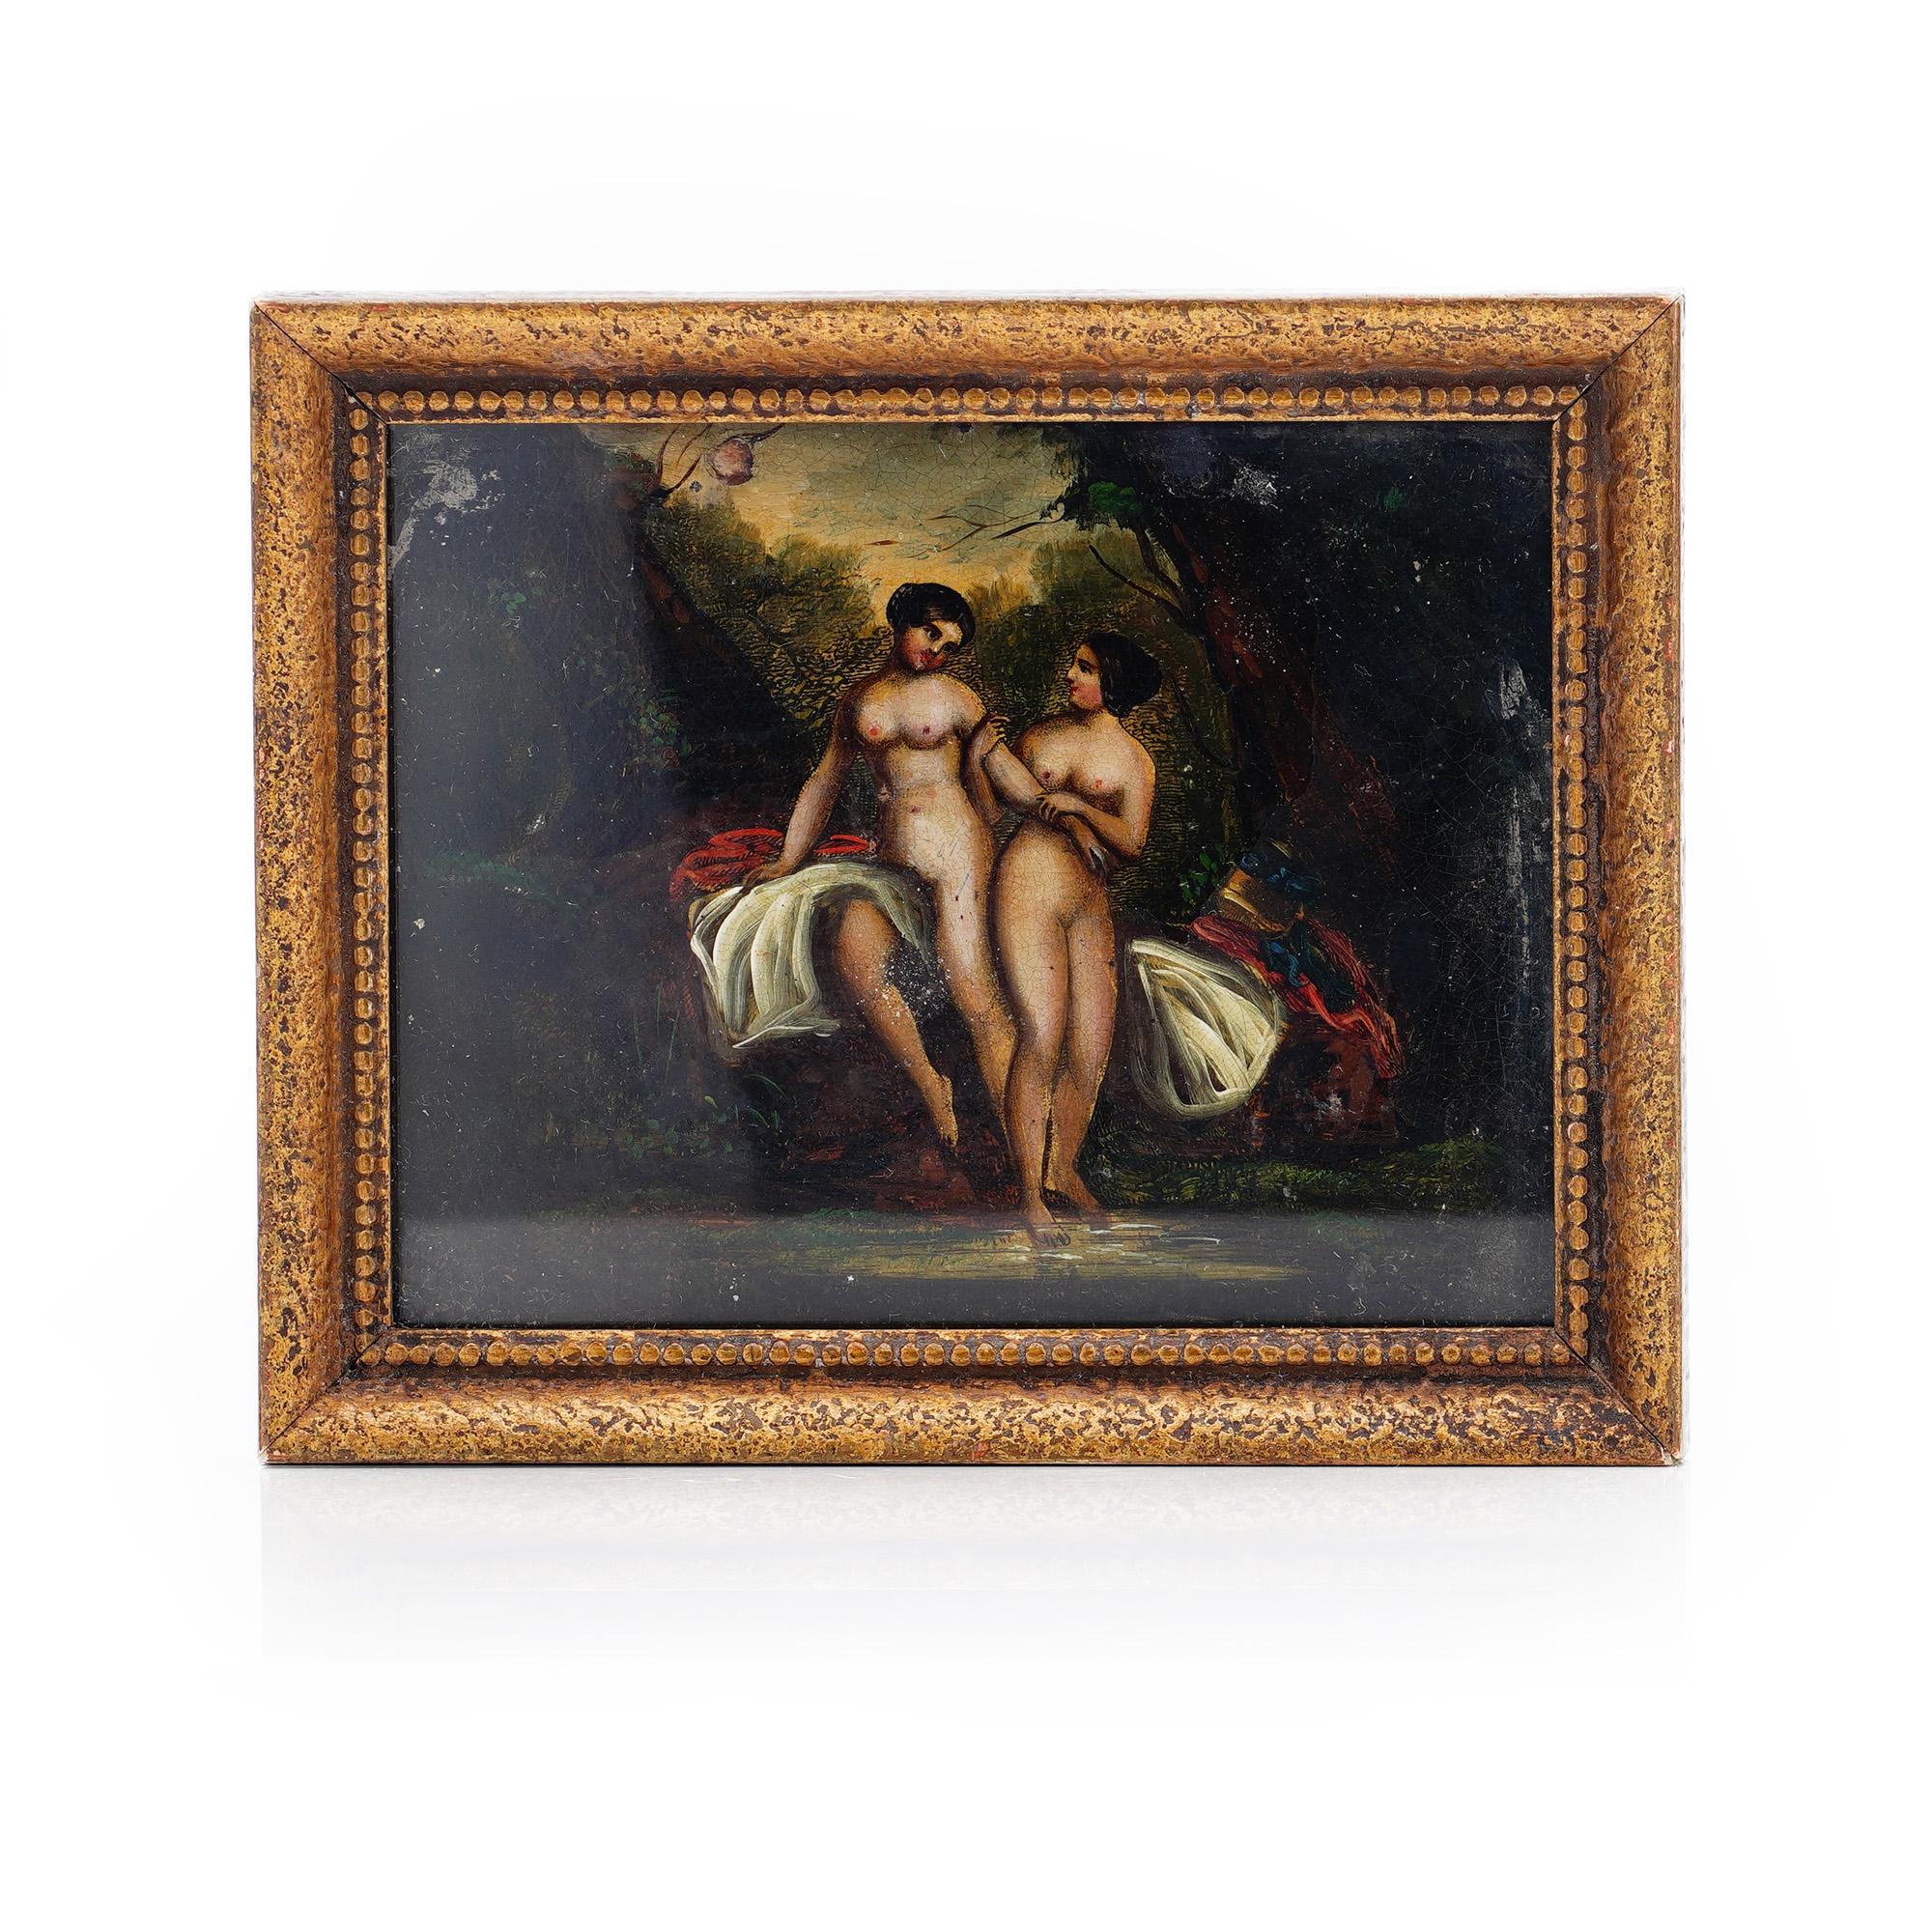 European Antique 19th Century Oil on Tin Painting ''Two Nudes in Nature'' For Sale